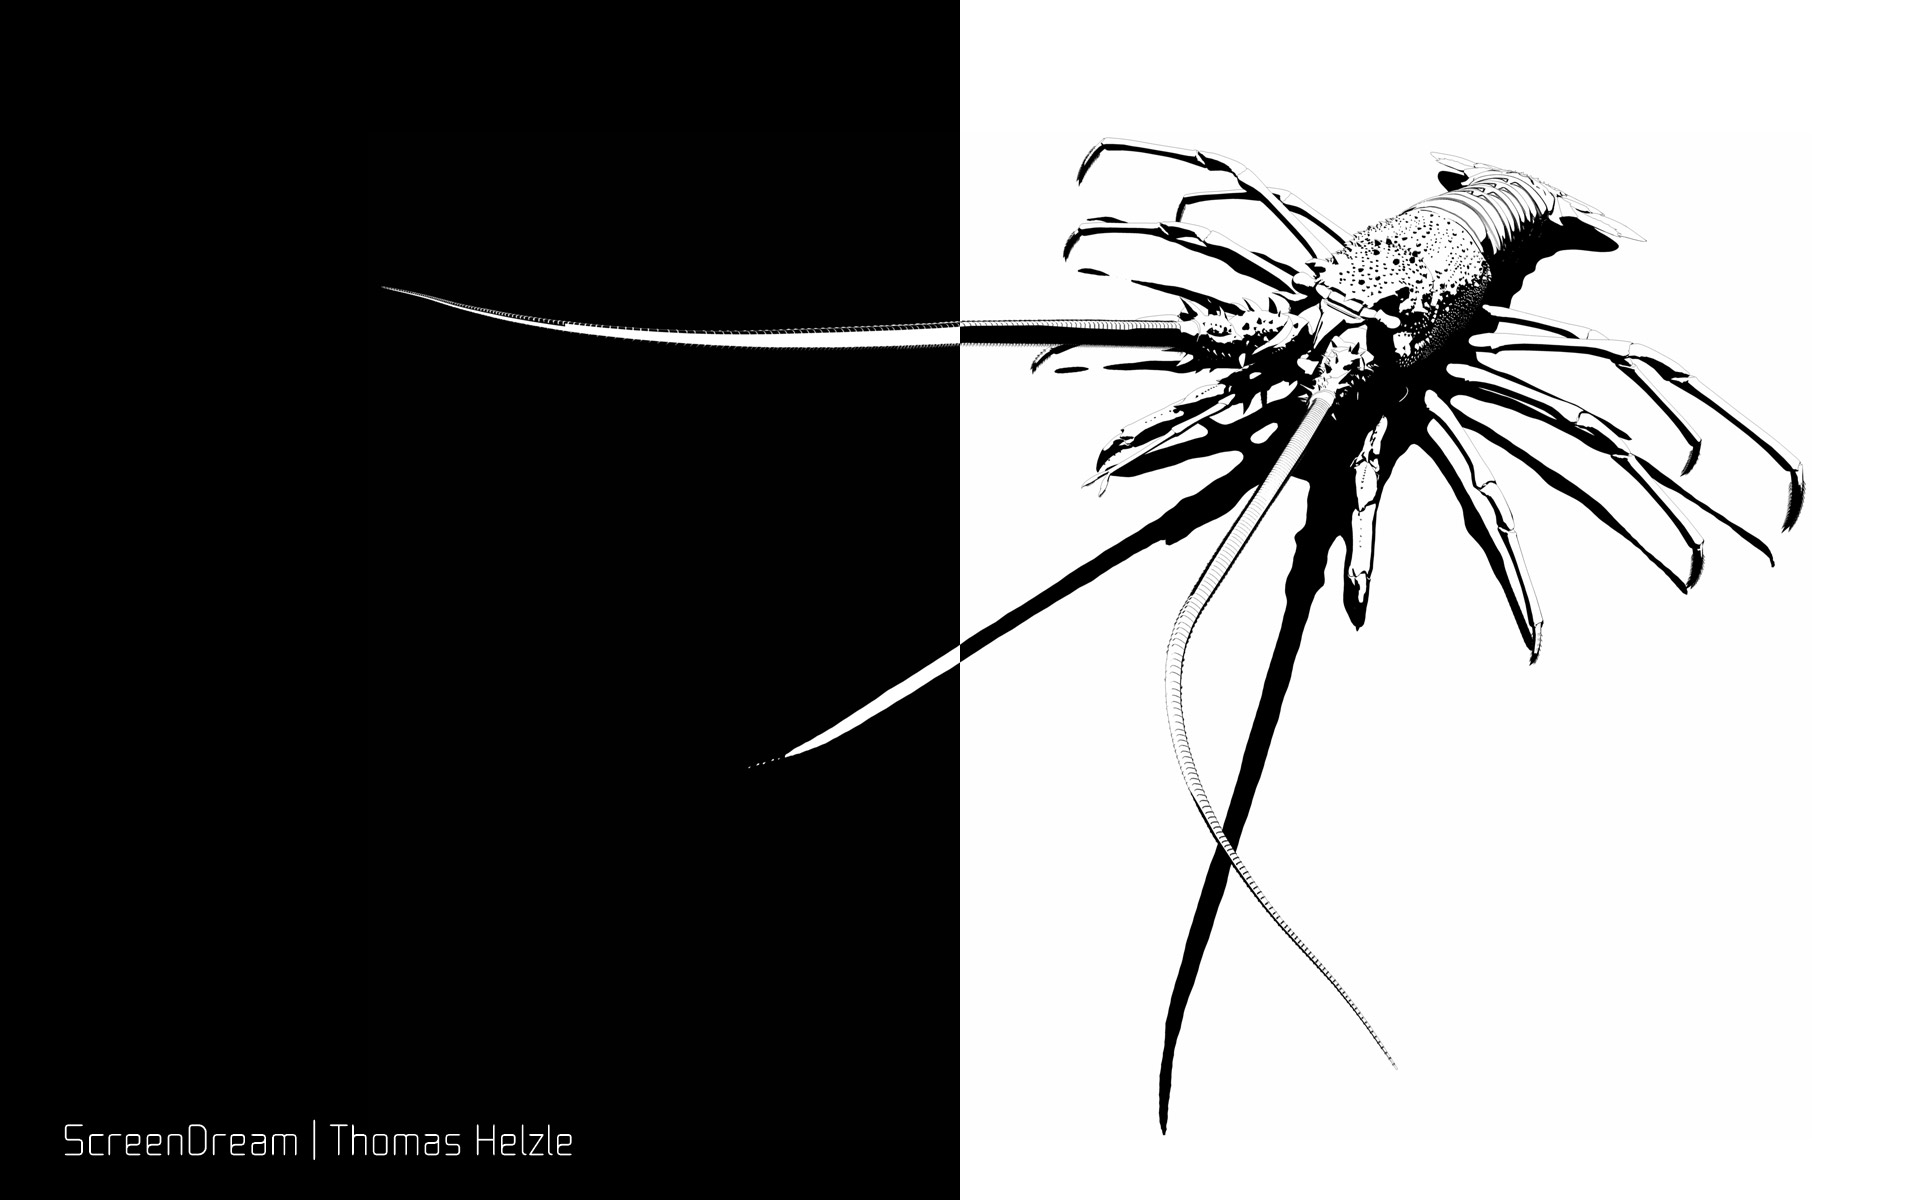 Stylised rendering of a Lobster in Black and White